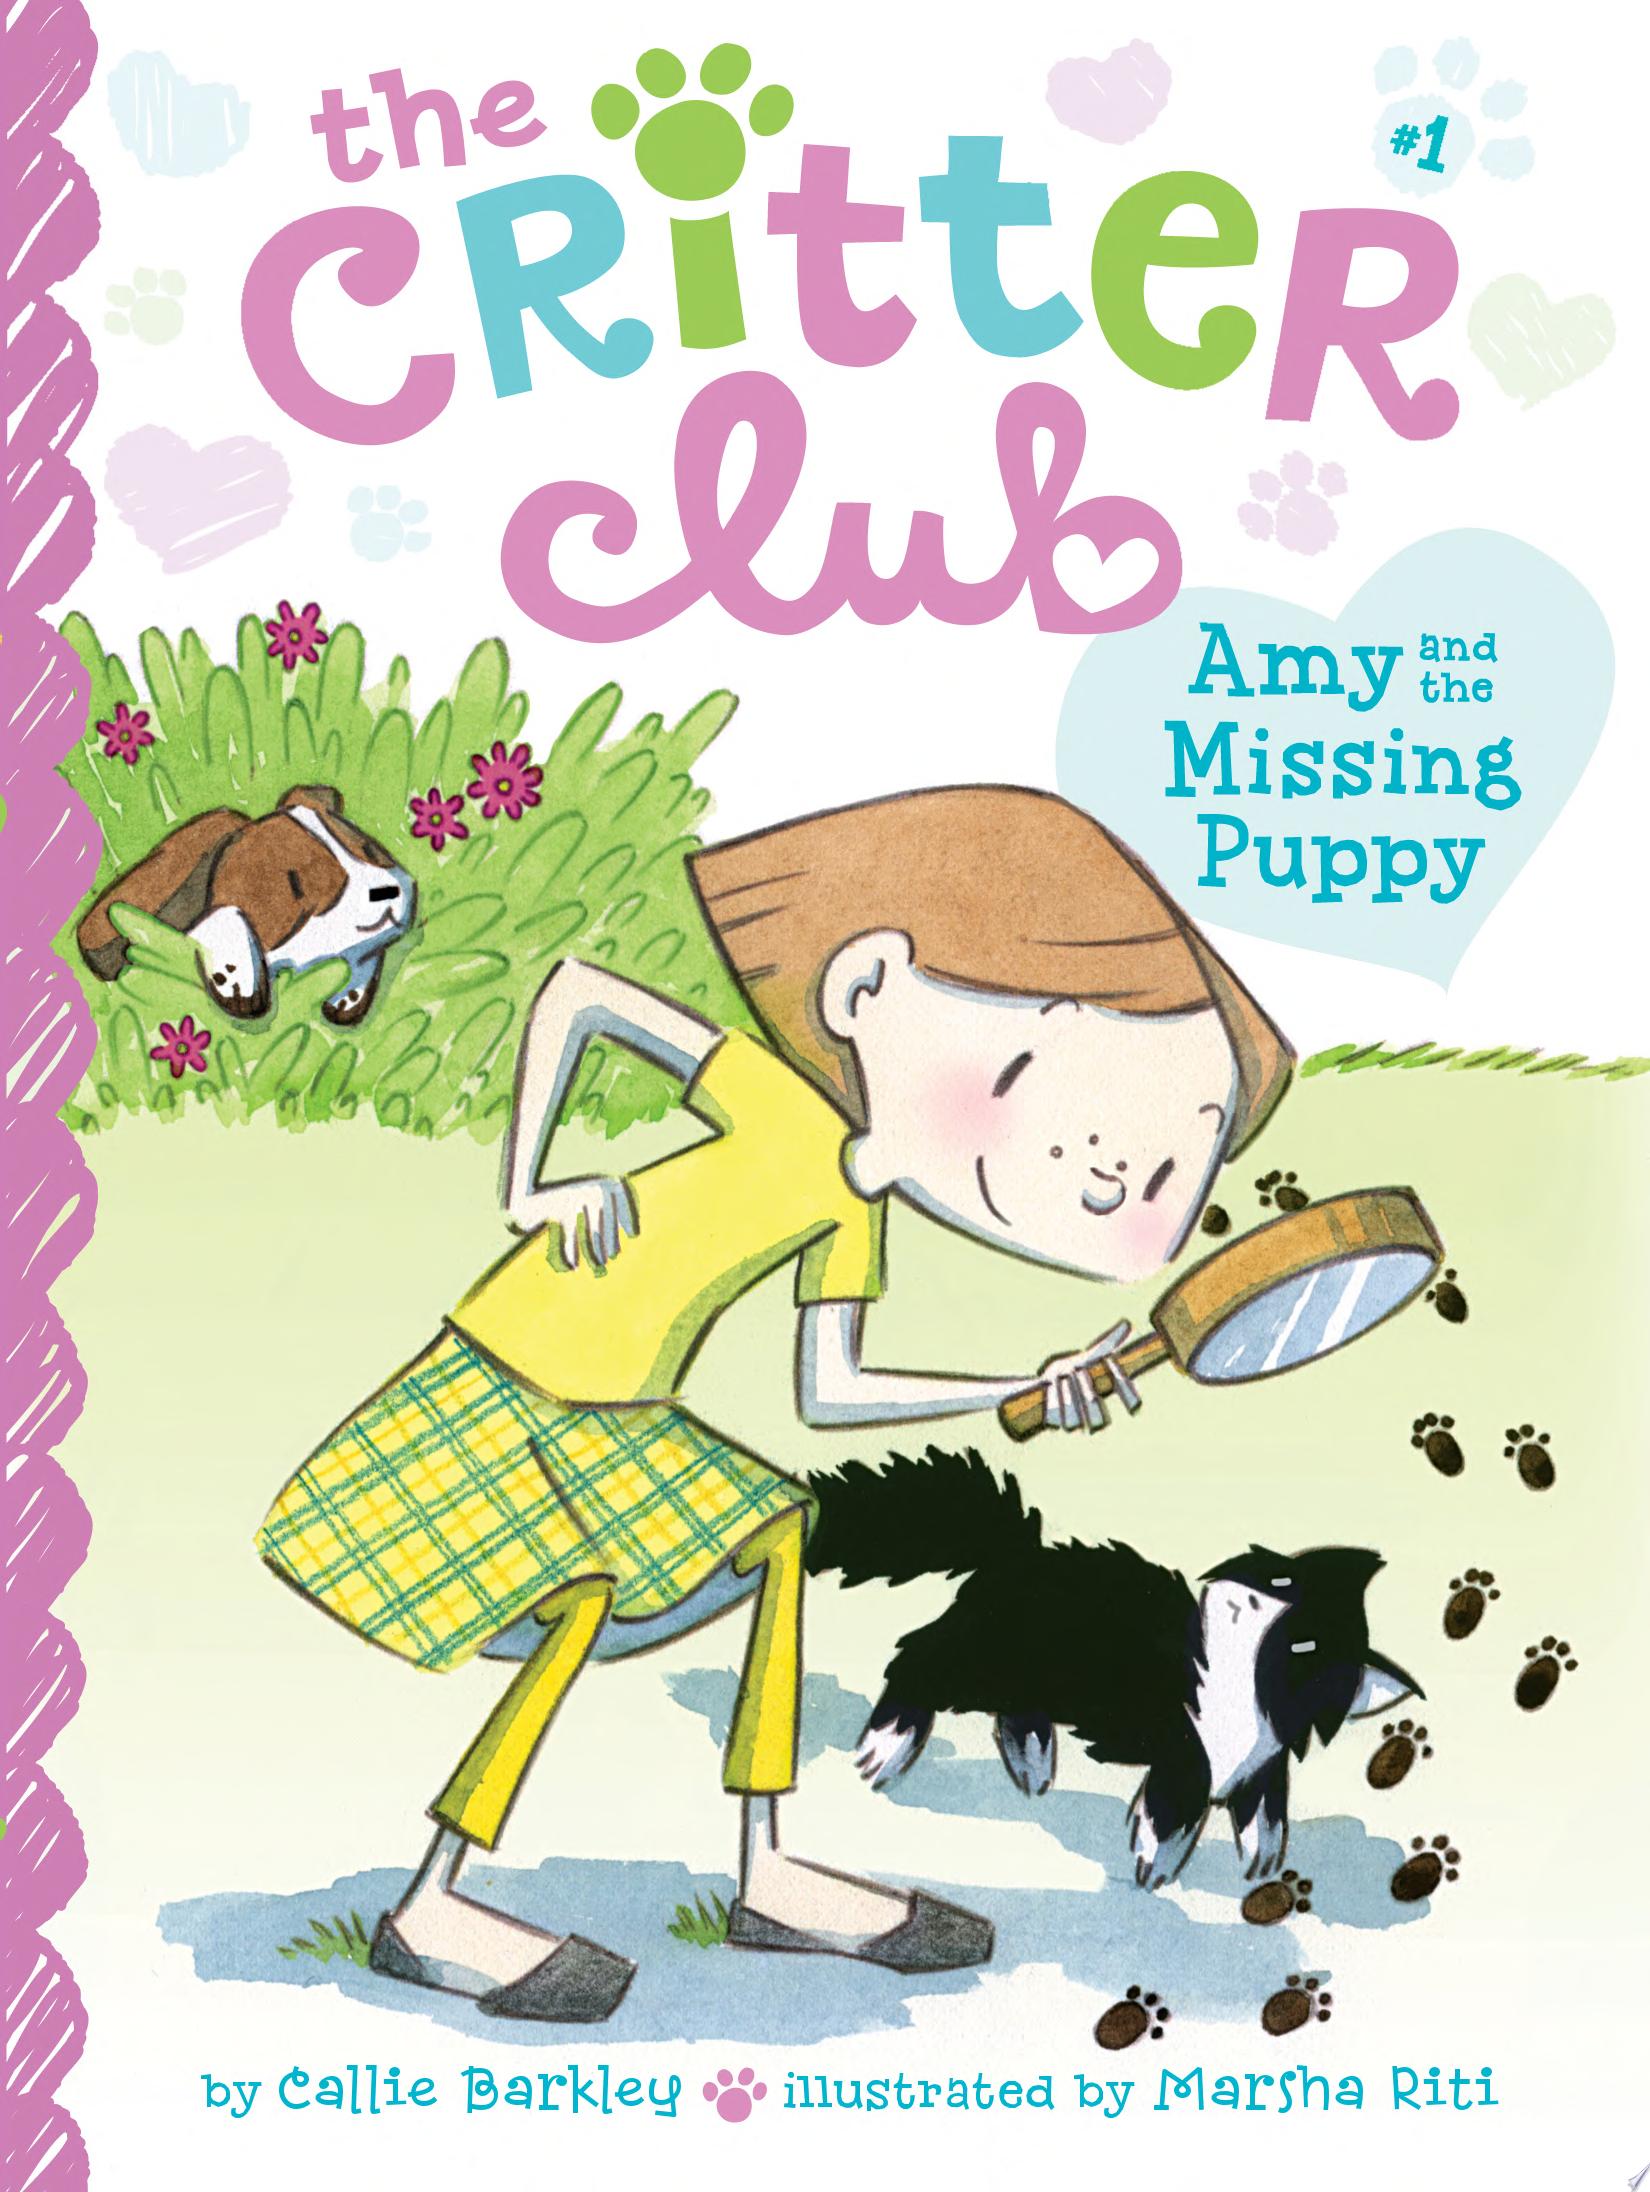 Image for "Amy and the Missing Puppy"